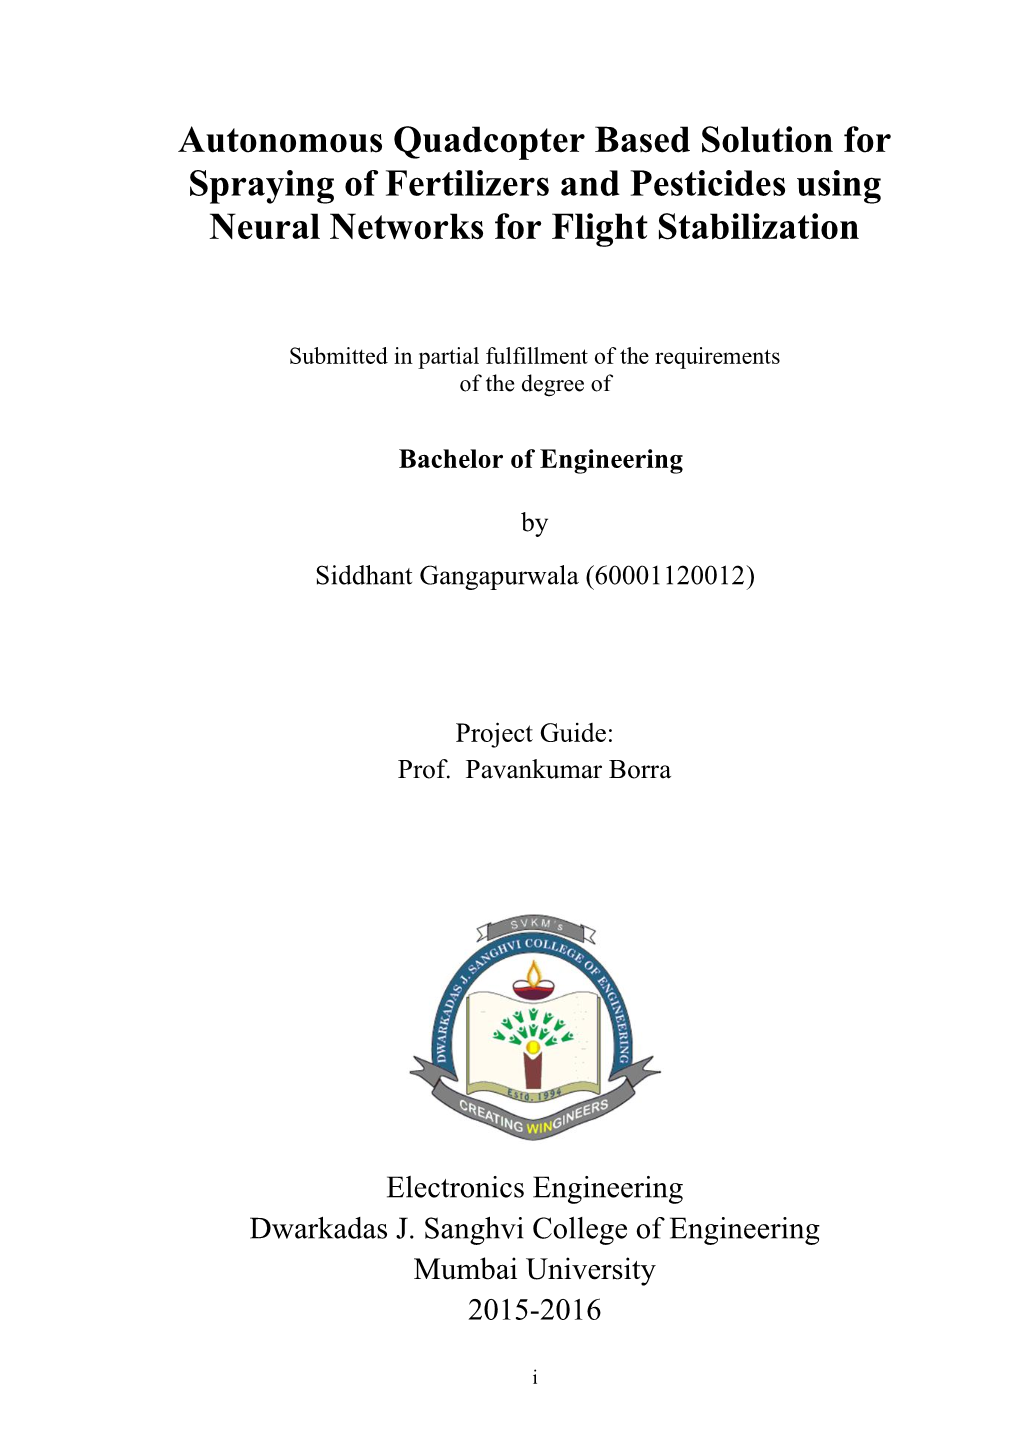 Autonomous Quadcopter Based Solution for Spraying of Fertilizers and Pesticides Using Neural Networks for Flight Stabilization